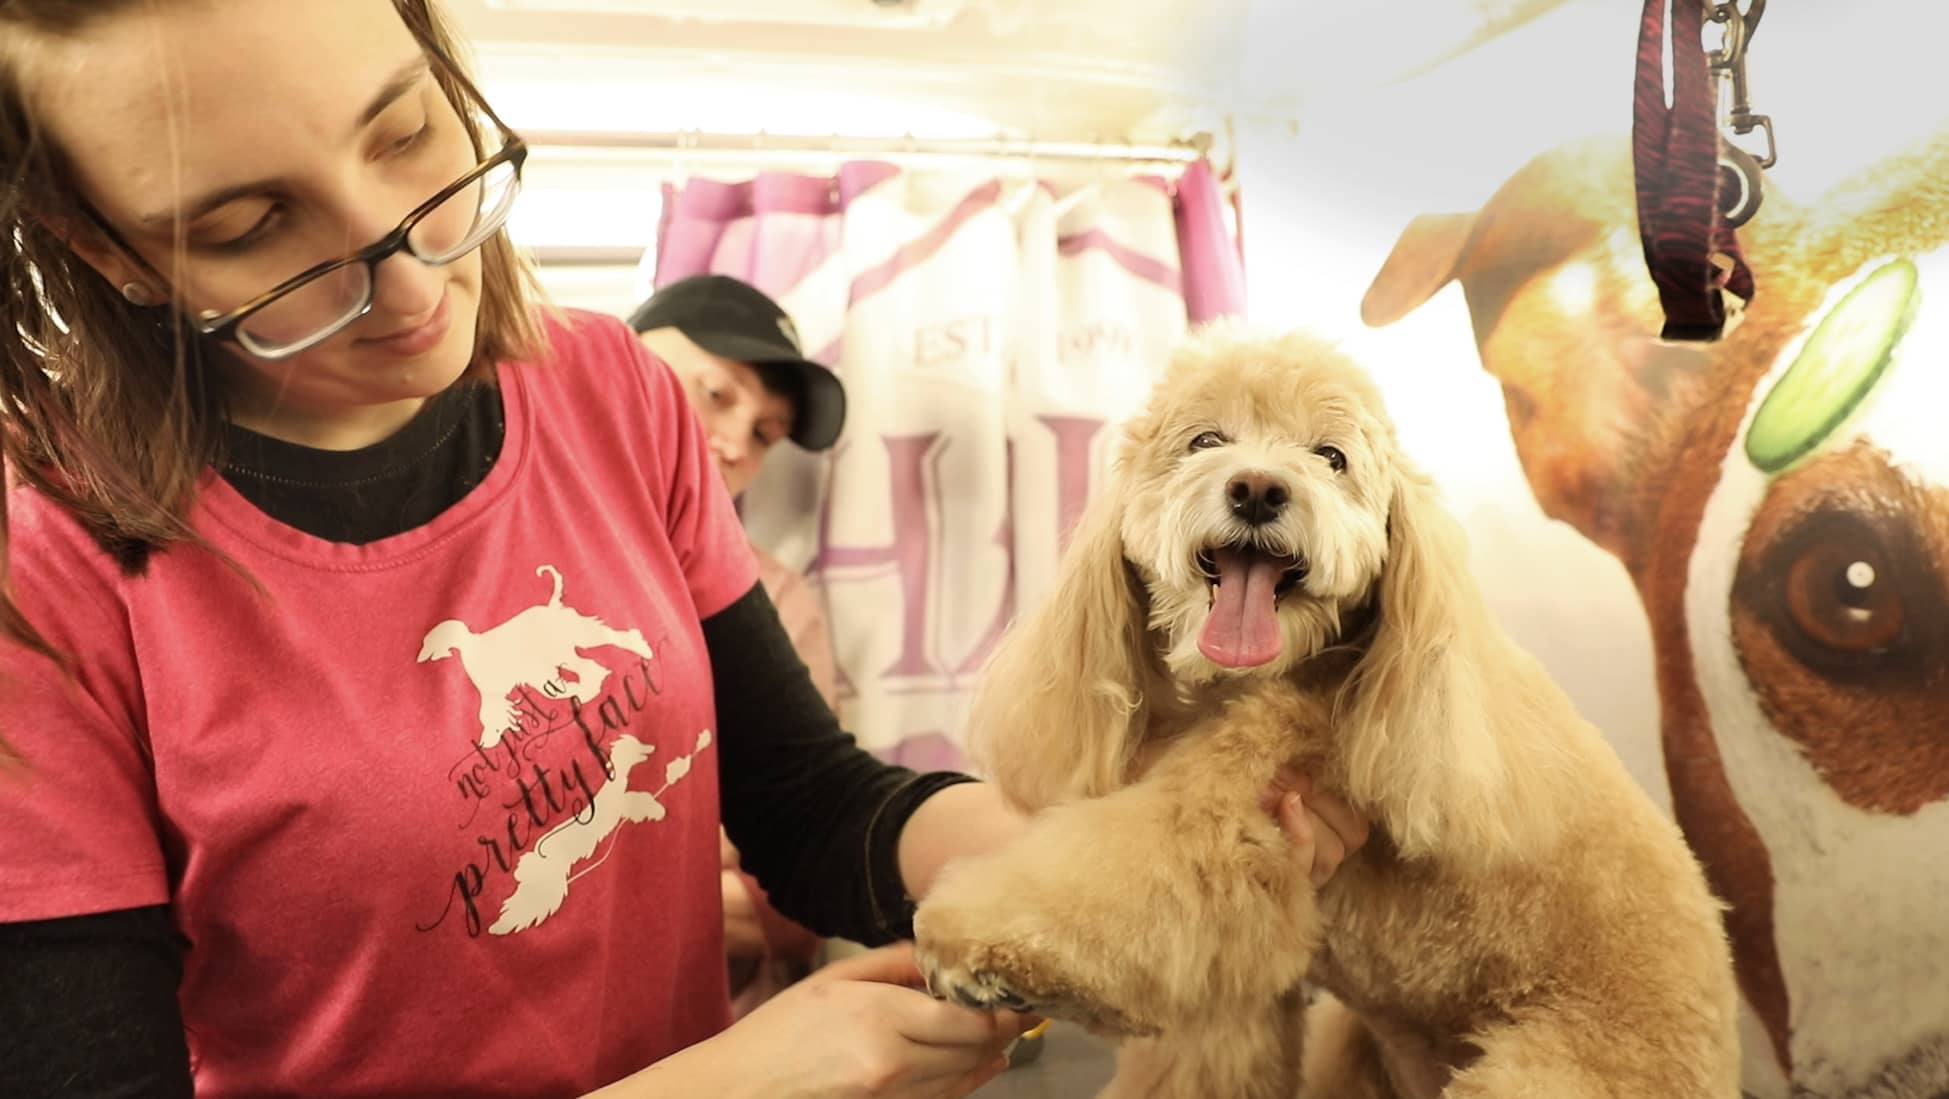 Opening a dog grooming business in New York City